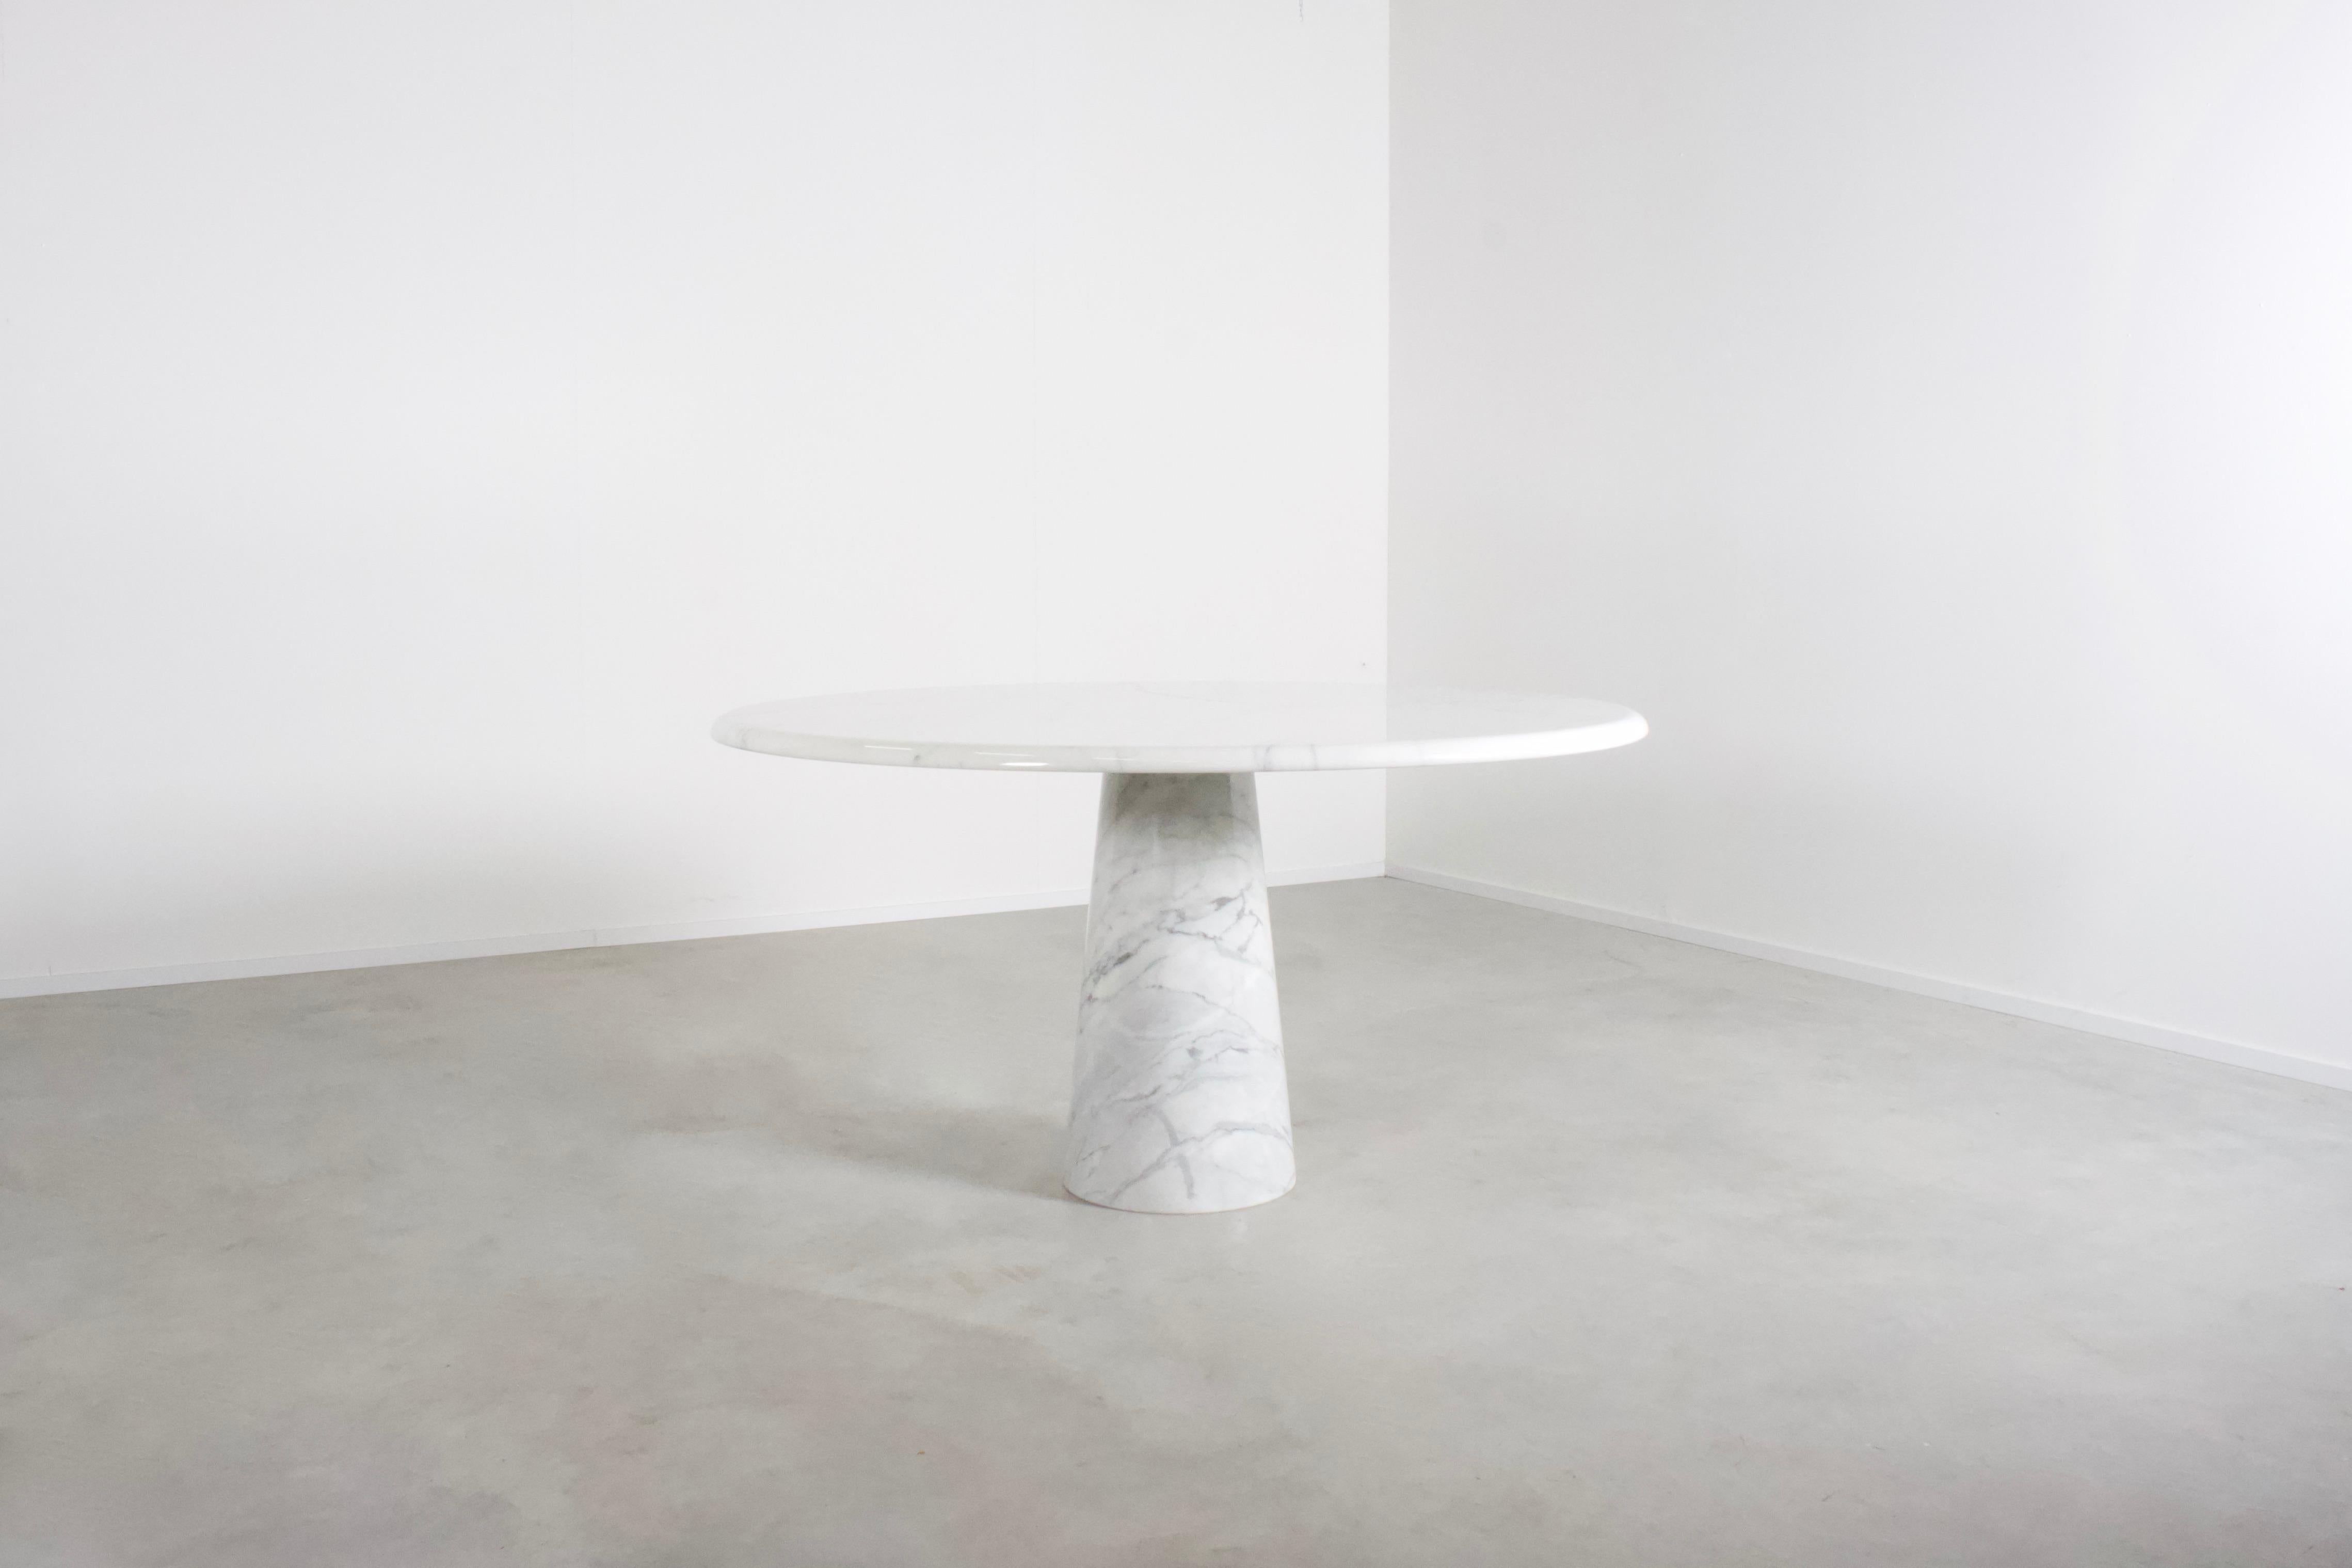 Round marble pedestal table in the manner of Angelo Mangiarotti in very good condition.

The table is made of solid Carrara marble. 

The top rests on a unique cone-shaped pedestal base also in Carrara marble. 
It balances perfectly and securely by